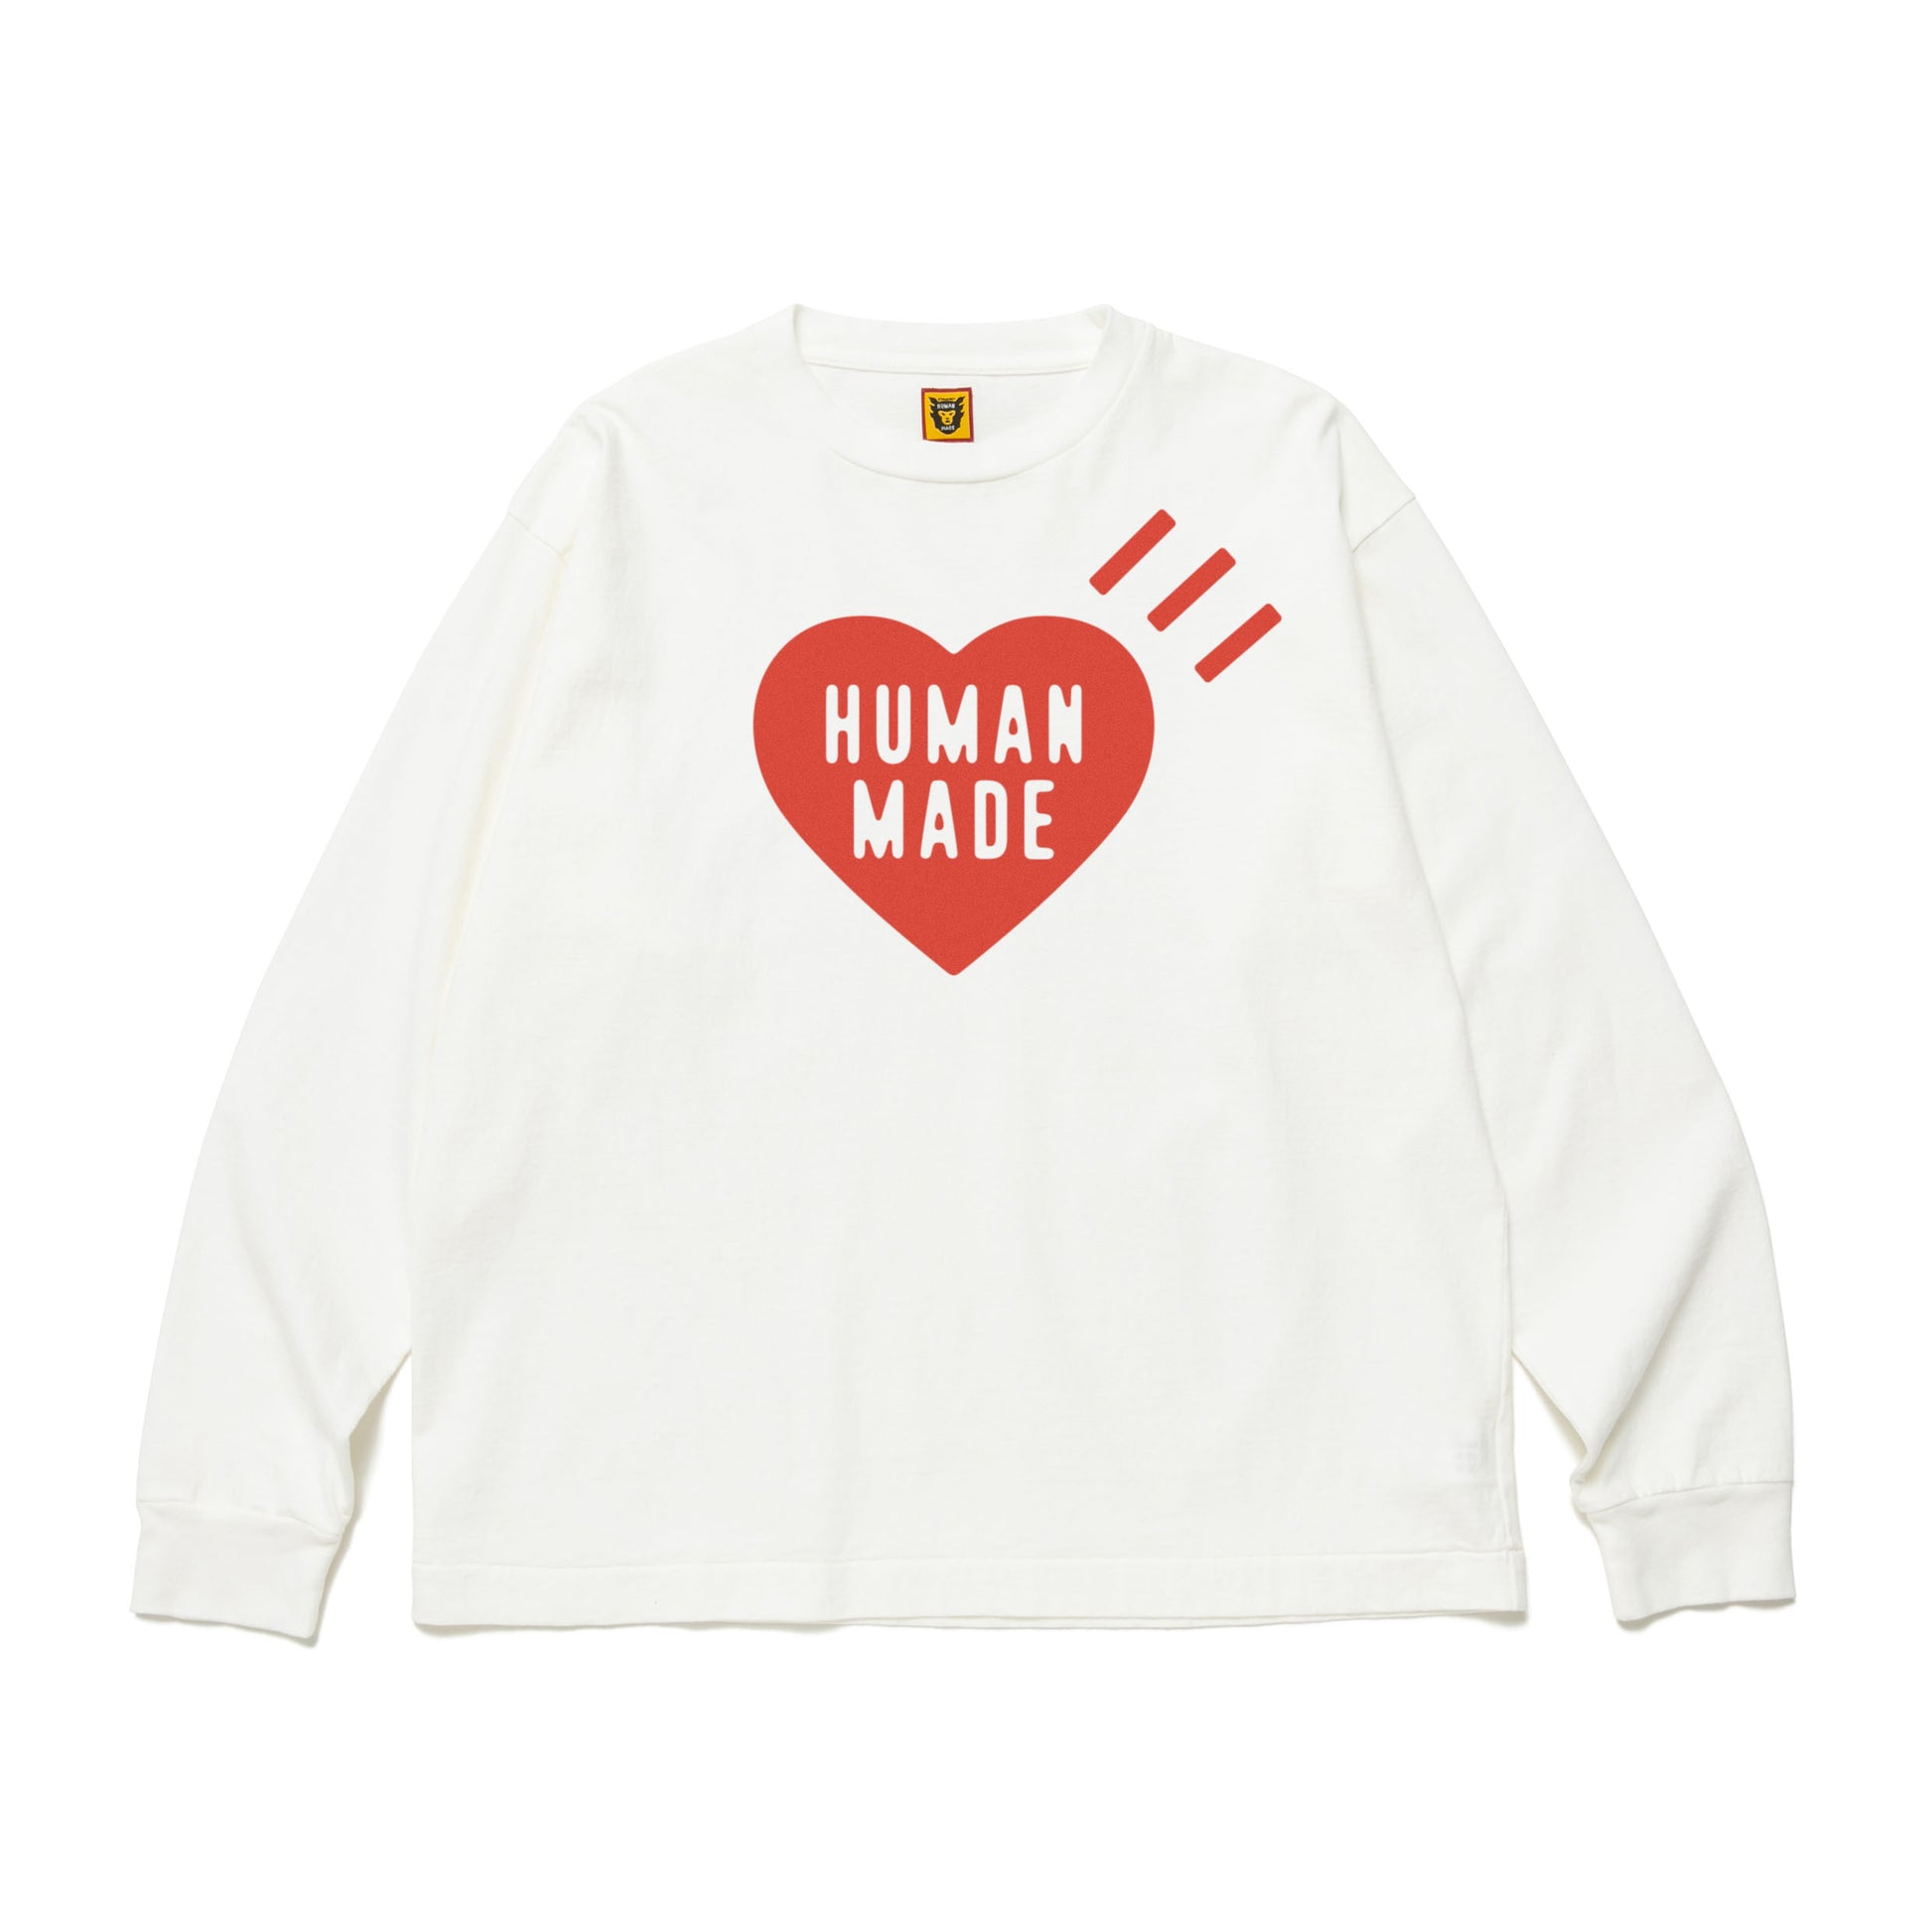 DAILY L/S T-SHIRT #261127 – HUMAN MADE ONLINE STORE